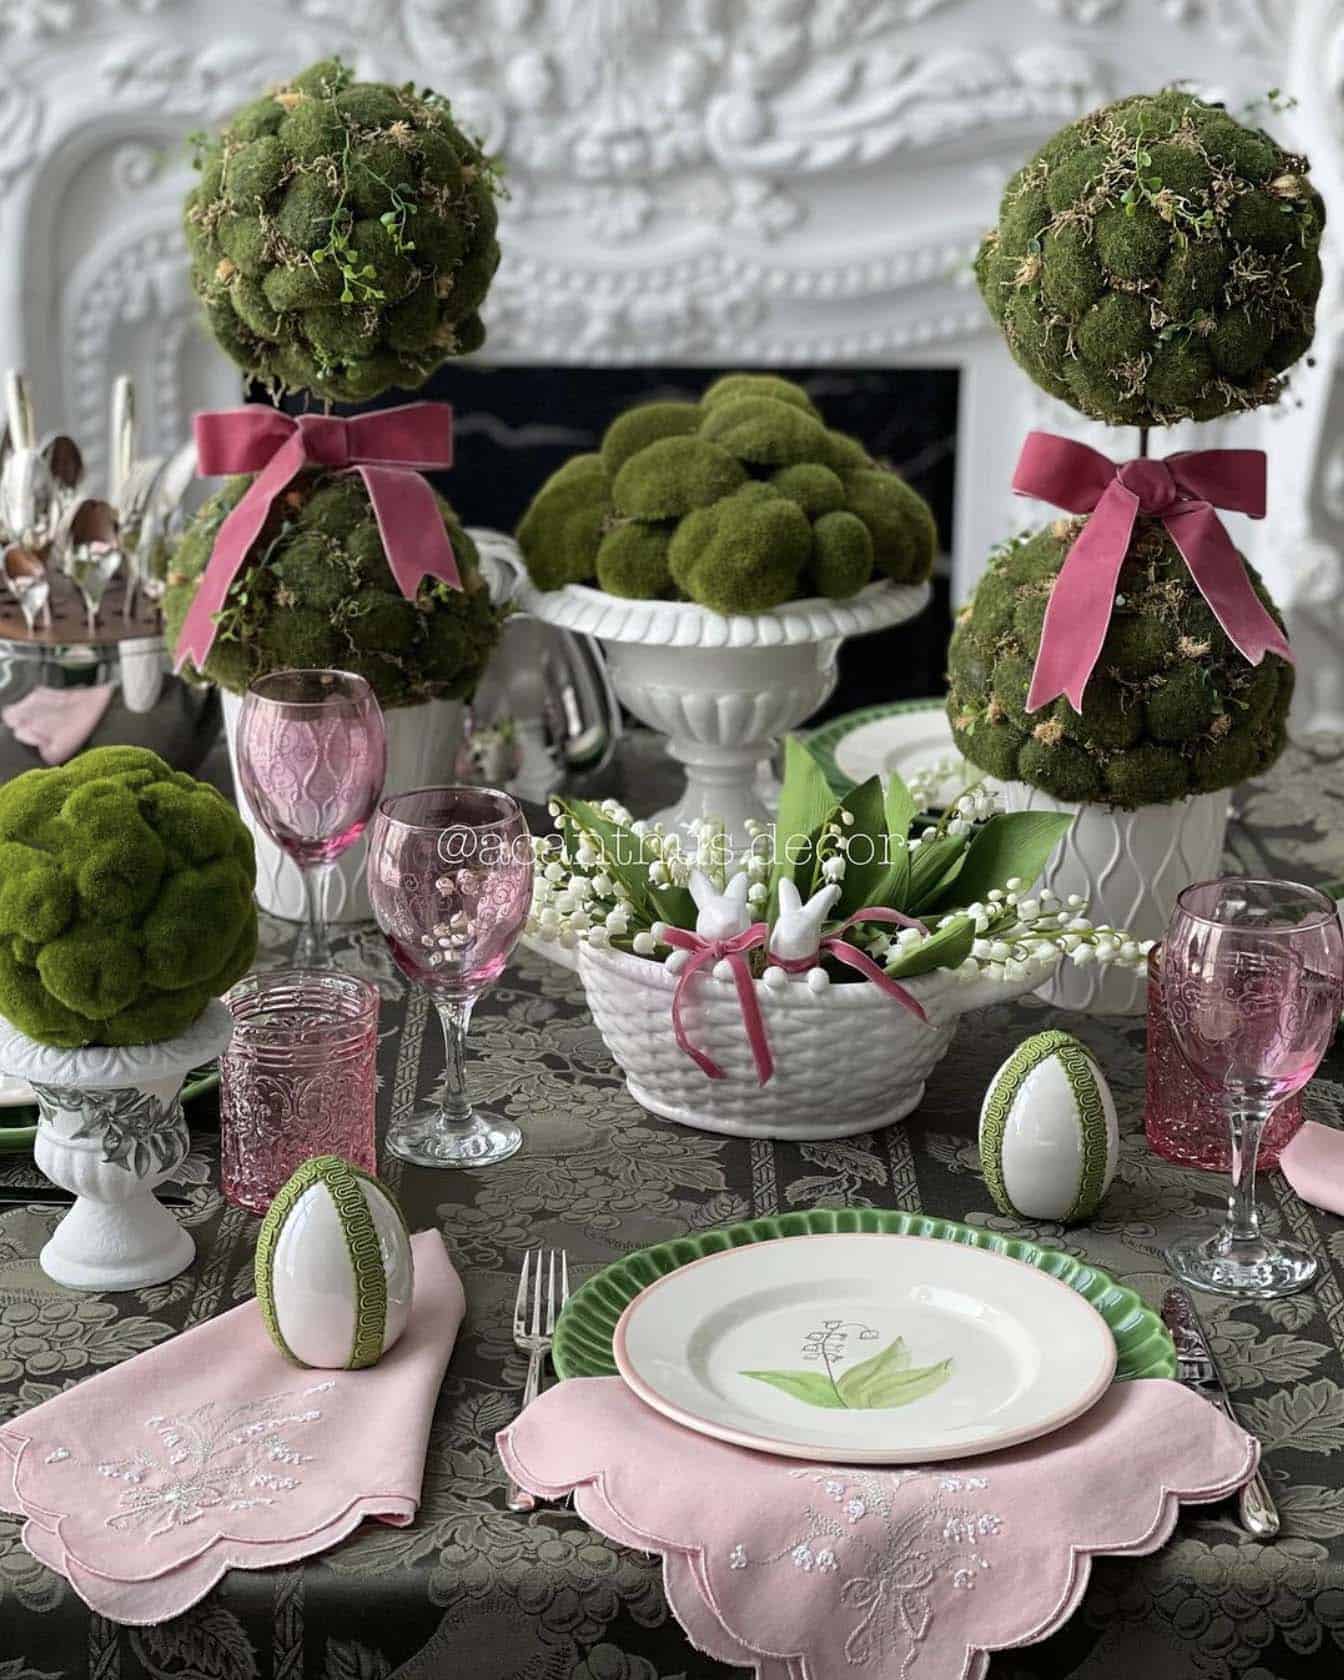 Easter table setting with topiaries and ceramic bowls with moss